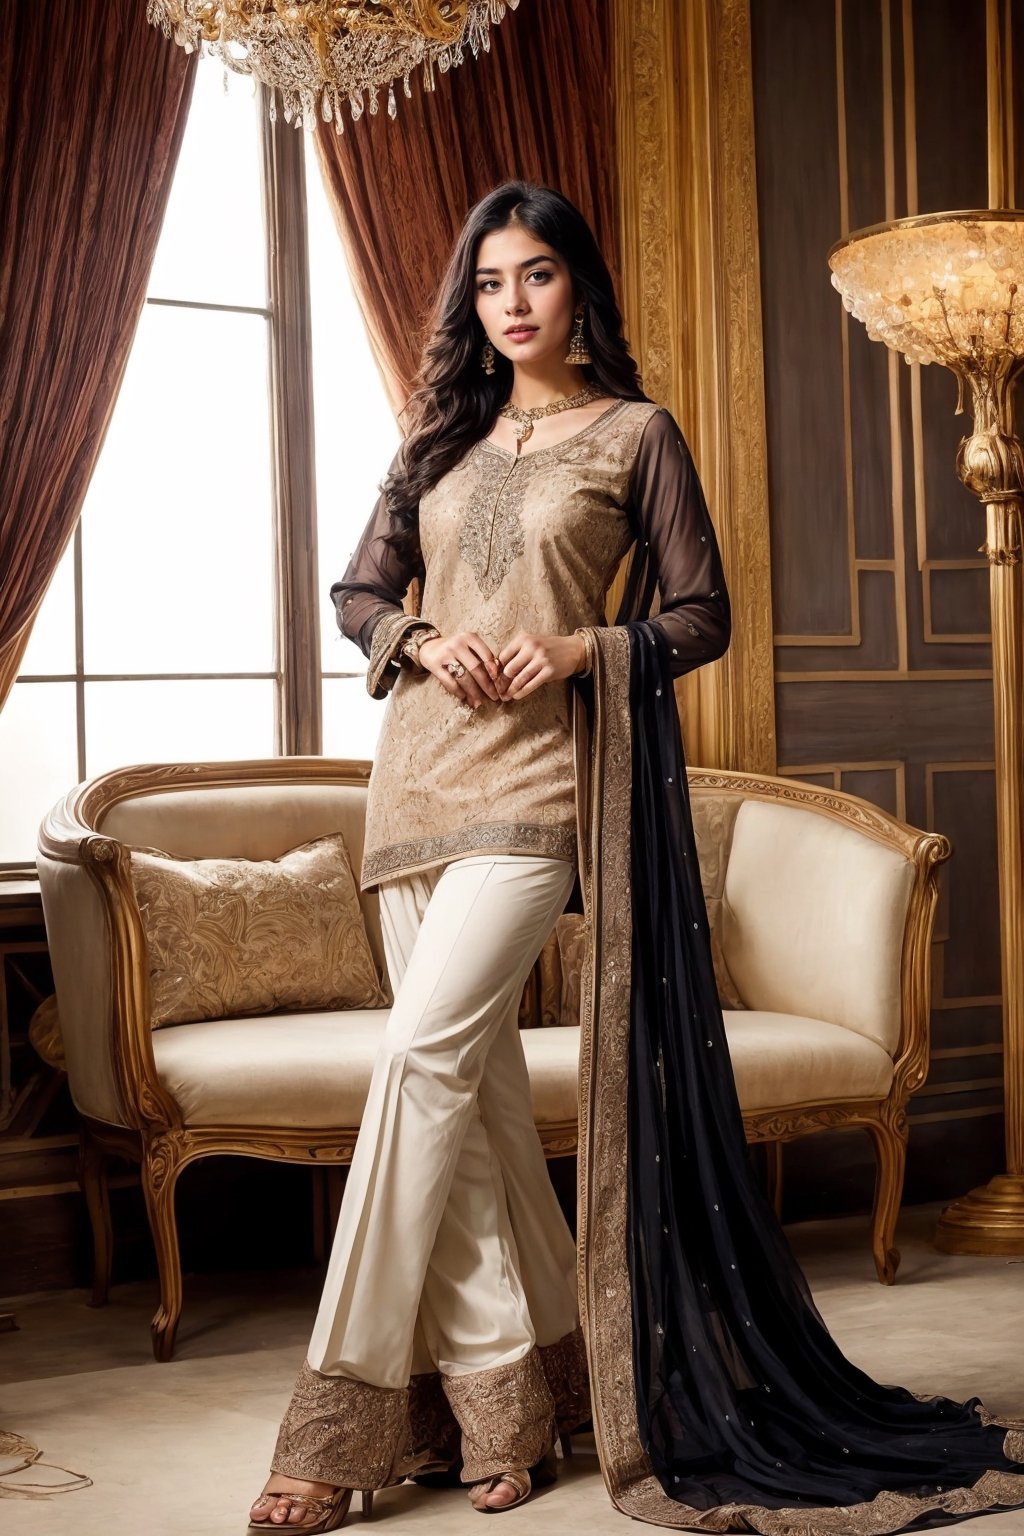 beautiful cute young attractive girl indian, teenage girl, village girl,18 year old,cute, instagram model,long black hair . Envision a Pakistani woman in an exquisite white shalwar kameez, lounging in a grand hotel foyer, the opulent surroundings reflecting her elegance, her demeanor suggesting sophistication as she wears fine jewelry and delicate earrings, Illustration, digital art with intricate detailing, capturing the richness of the setting, --ar 16:9 --v 5